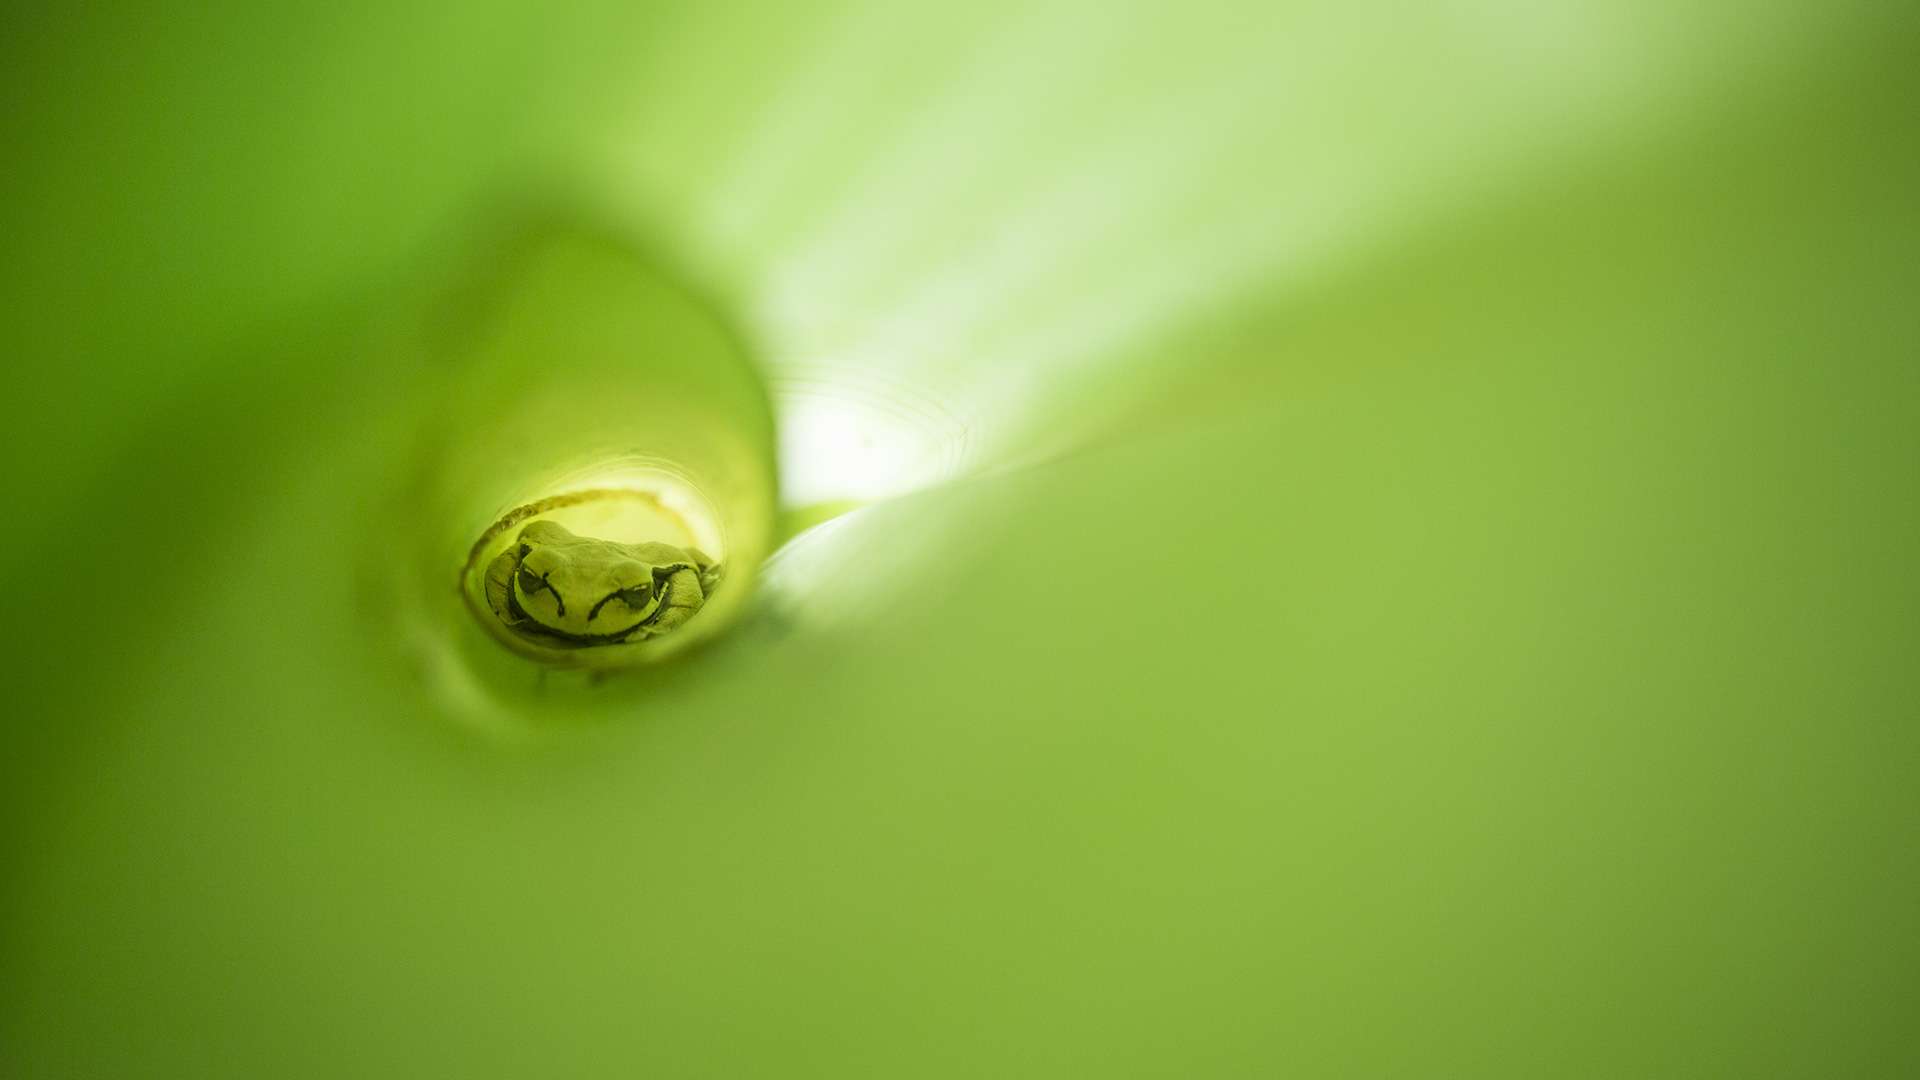 Gilles Martin's photograph of a tree frog in Costa Rica